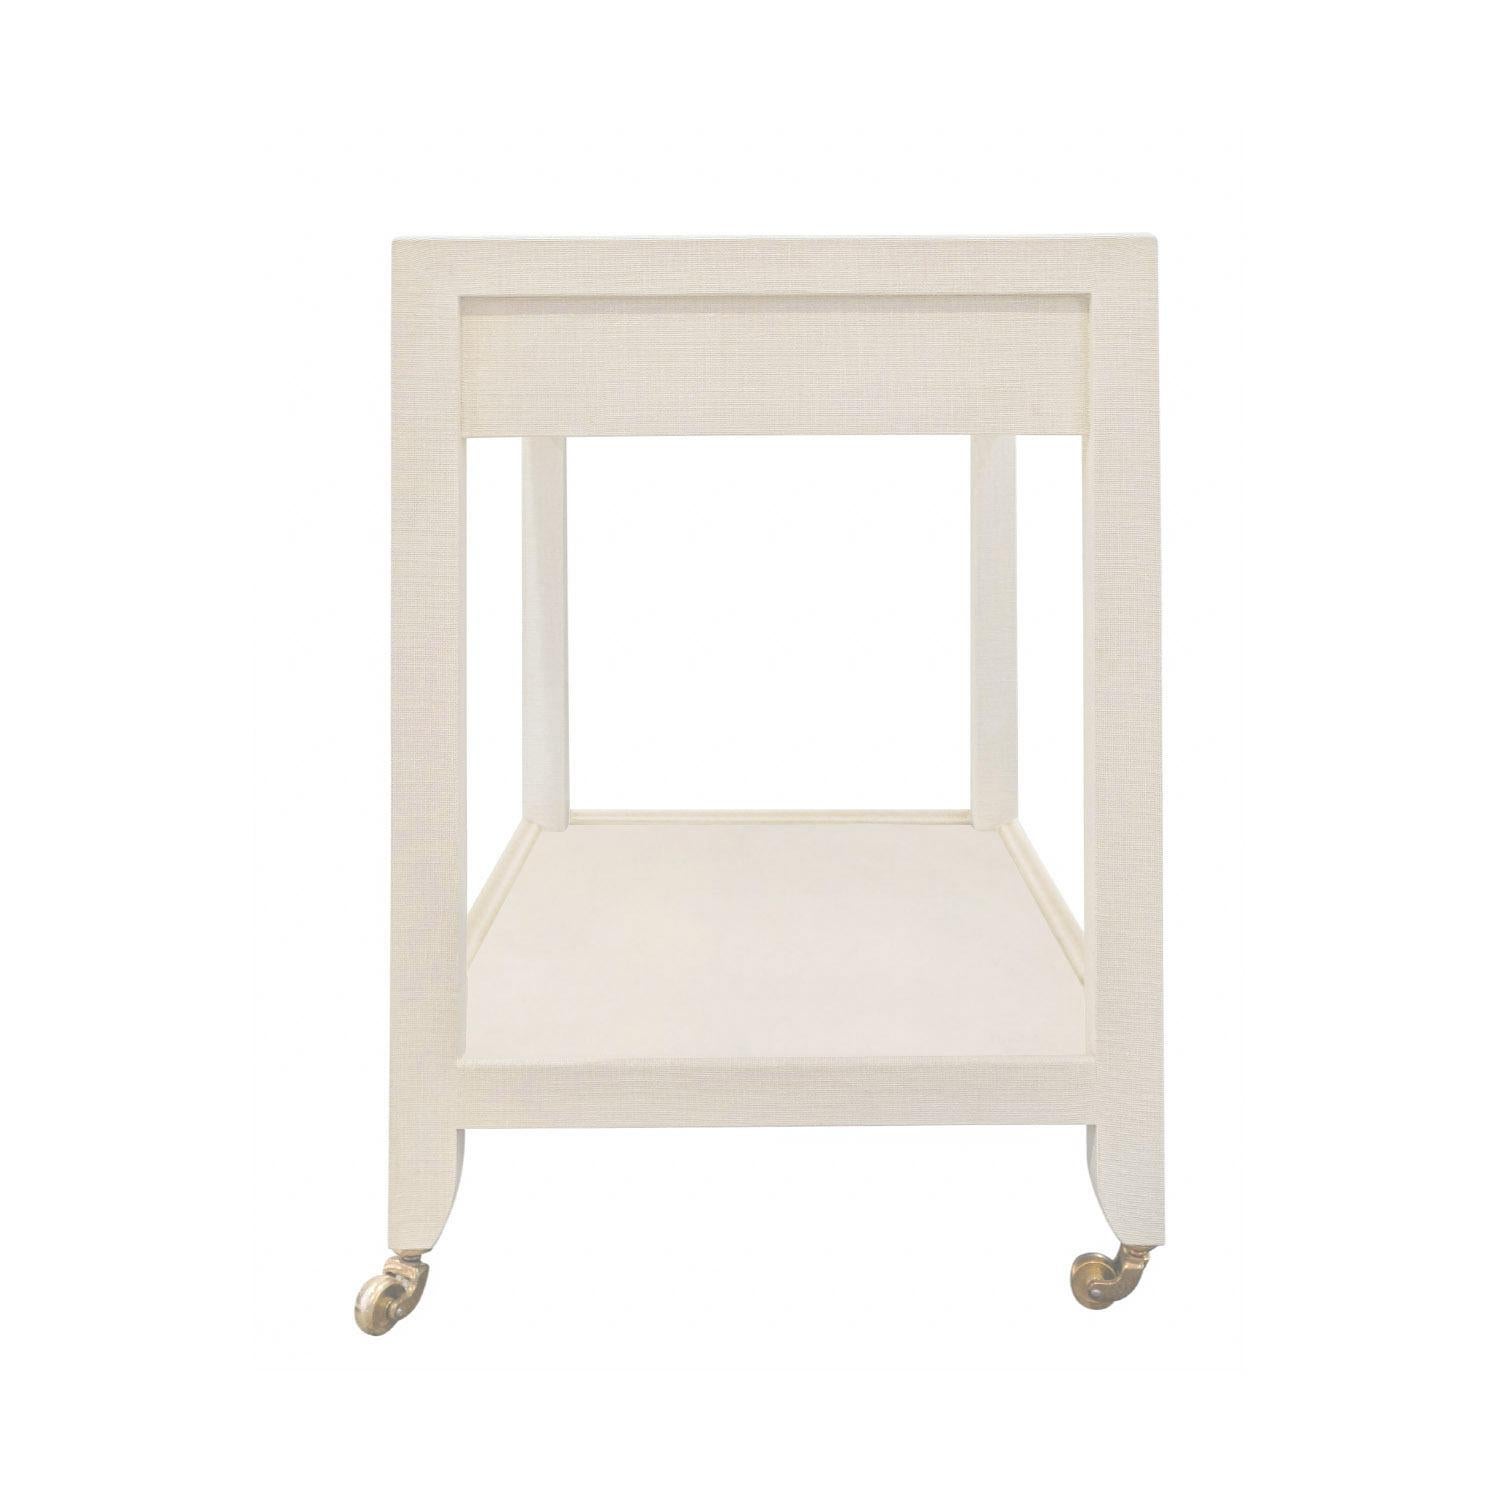 Karl Springer 2-Tier Side Table in Lacquered Linen 2002 'Signed' In Excellent Condition For Sale In New York, NY